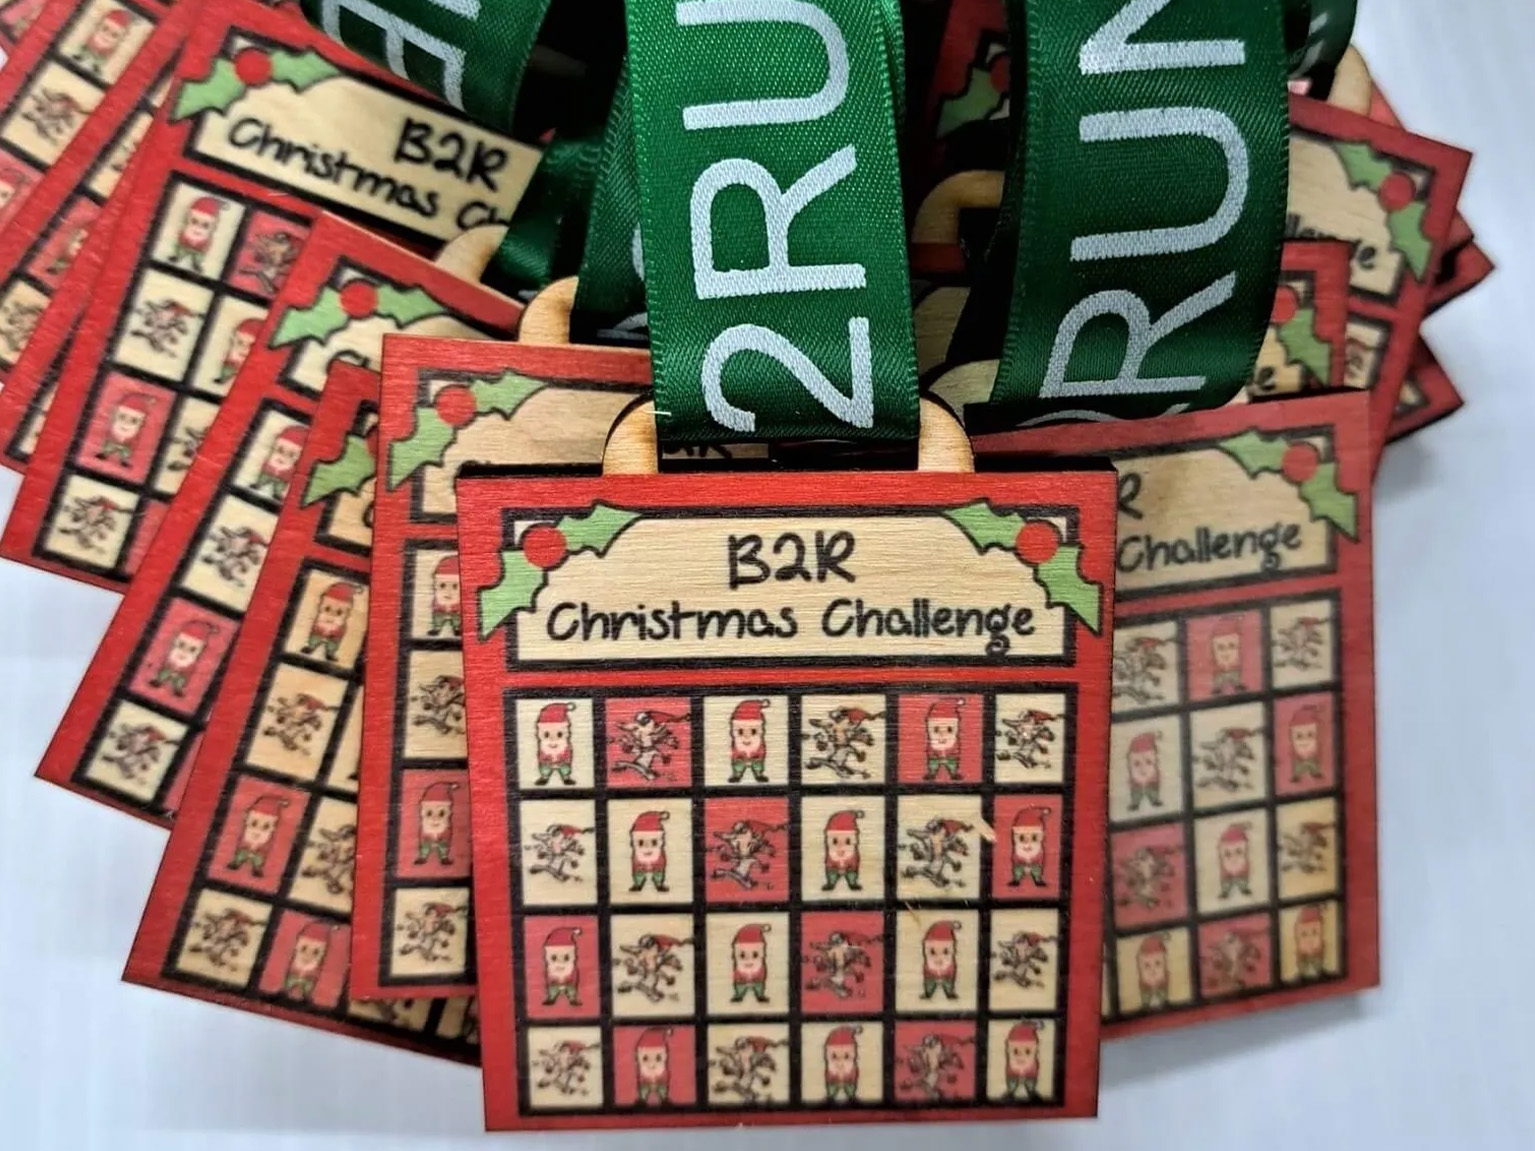 A collection of colorful Christmas challenge medals displayed on a table.